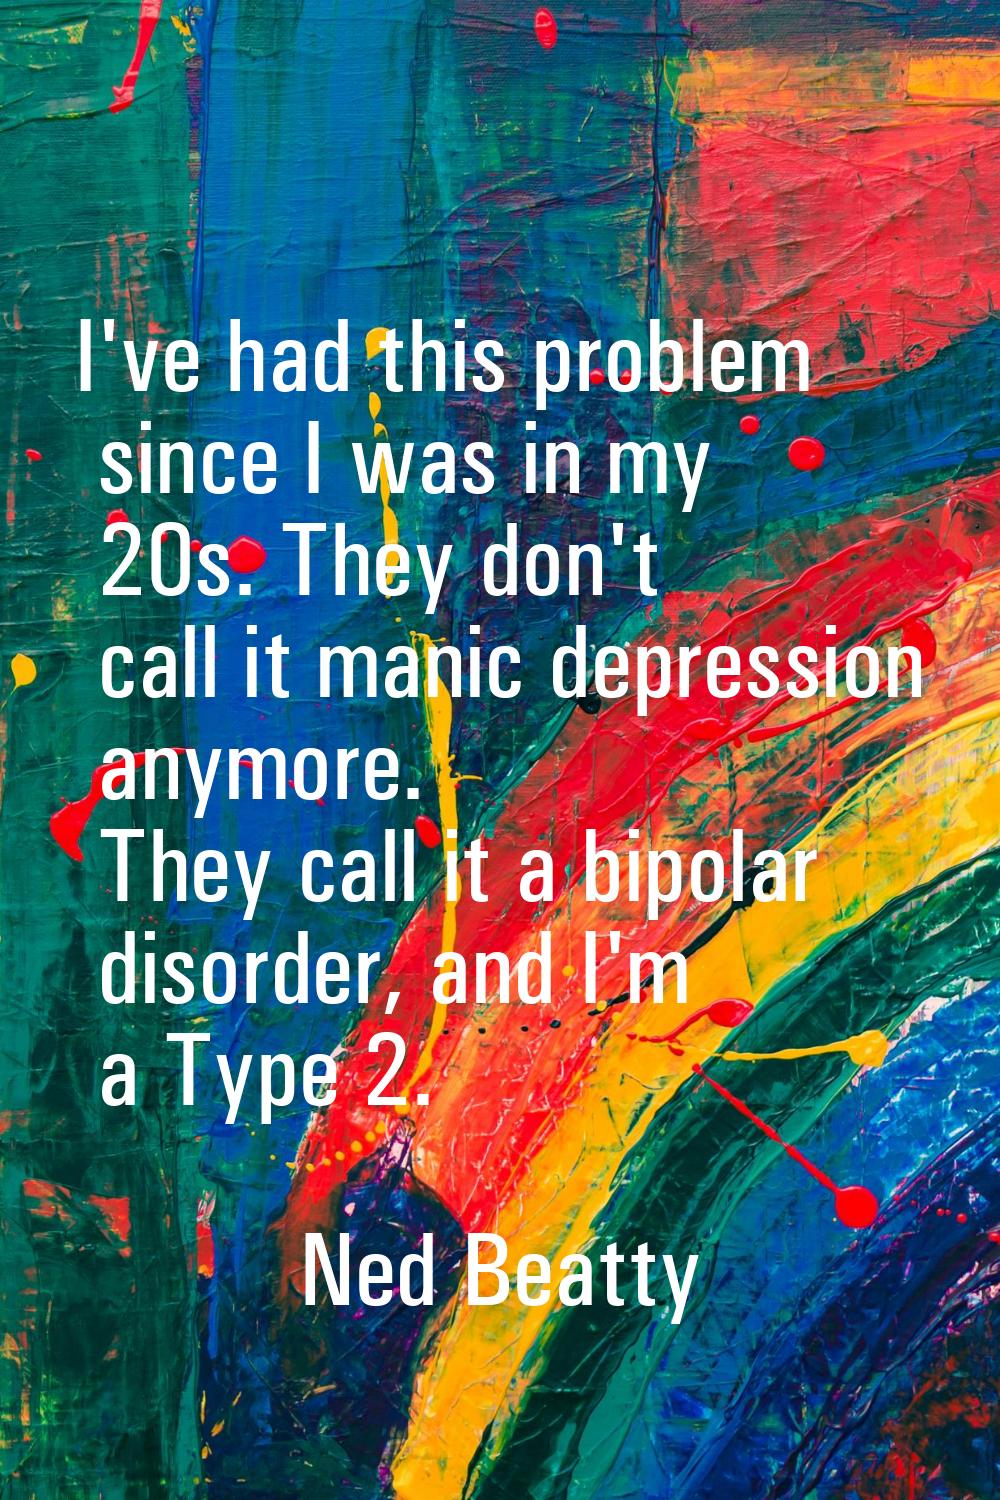 I've had this problem since I was in my 20s. They don't call it manic depression anymore. They call